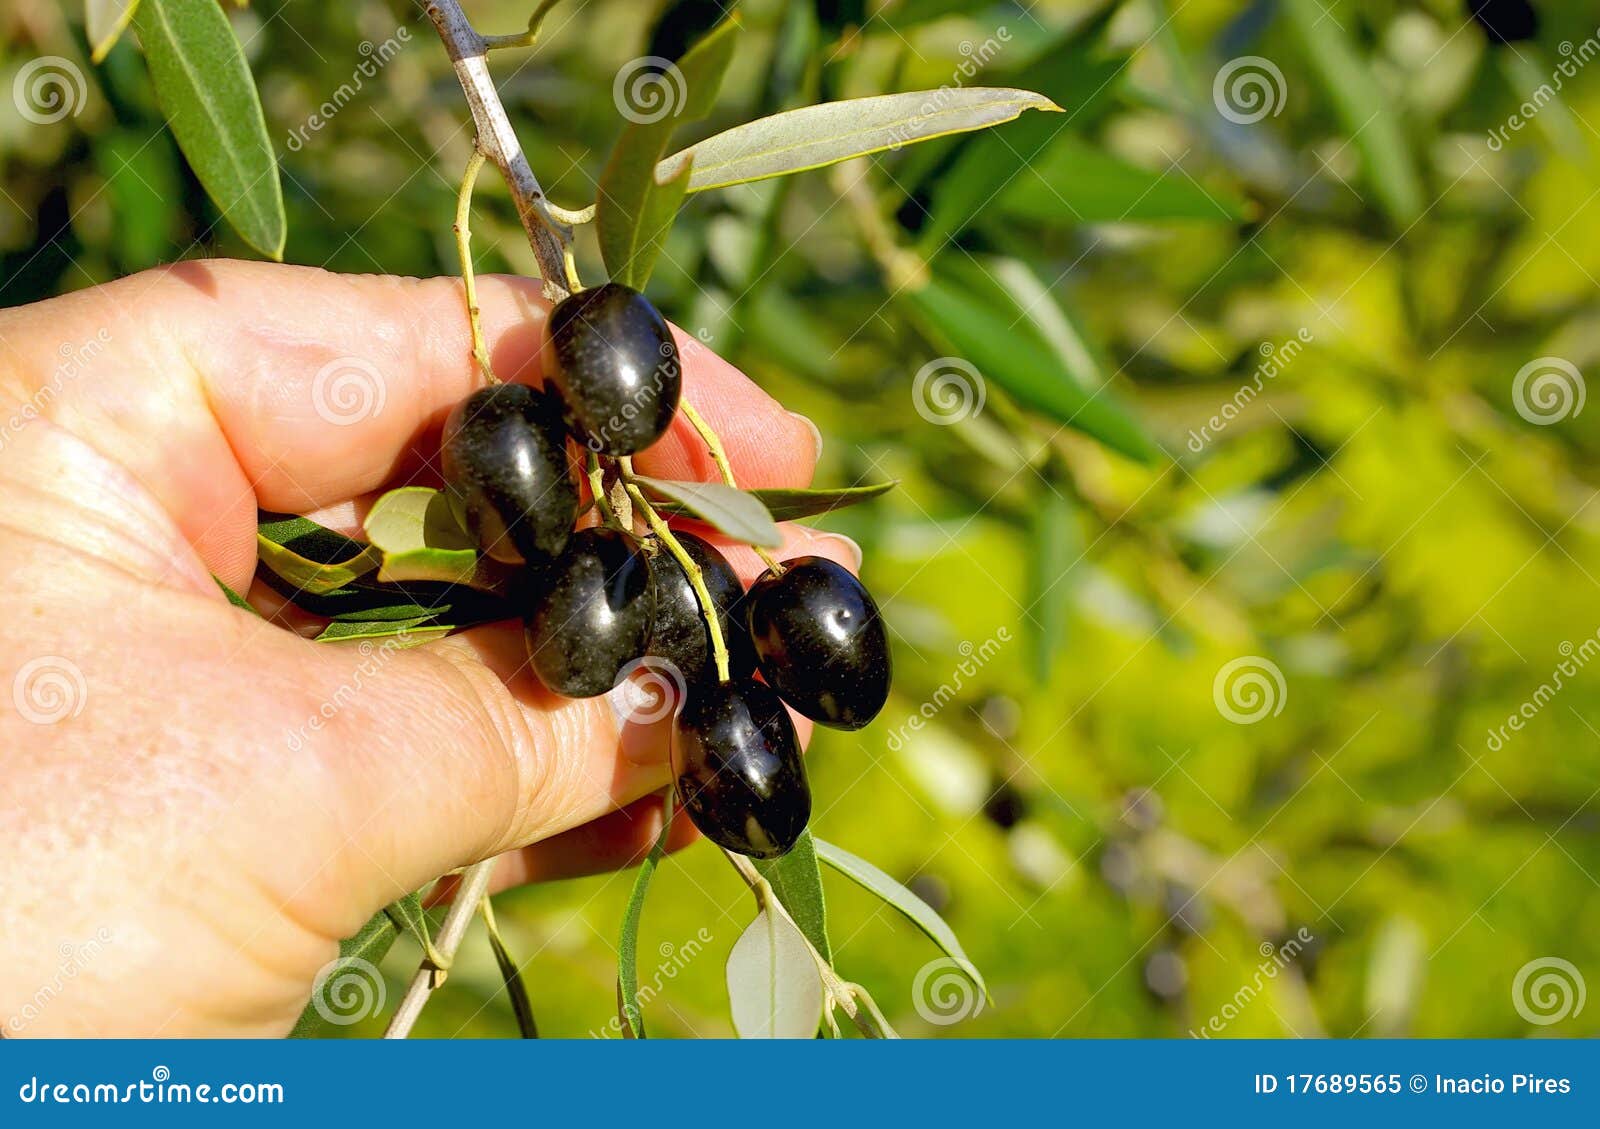 branch of olives in hands.